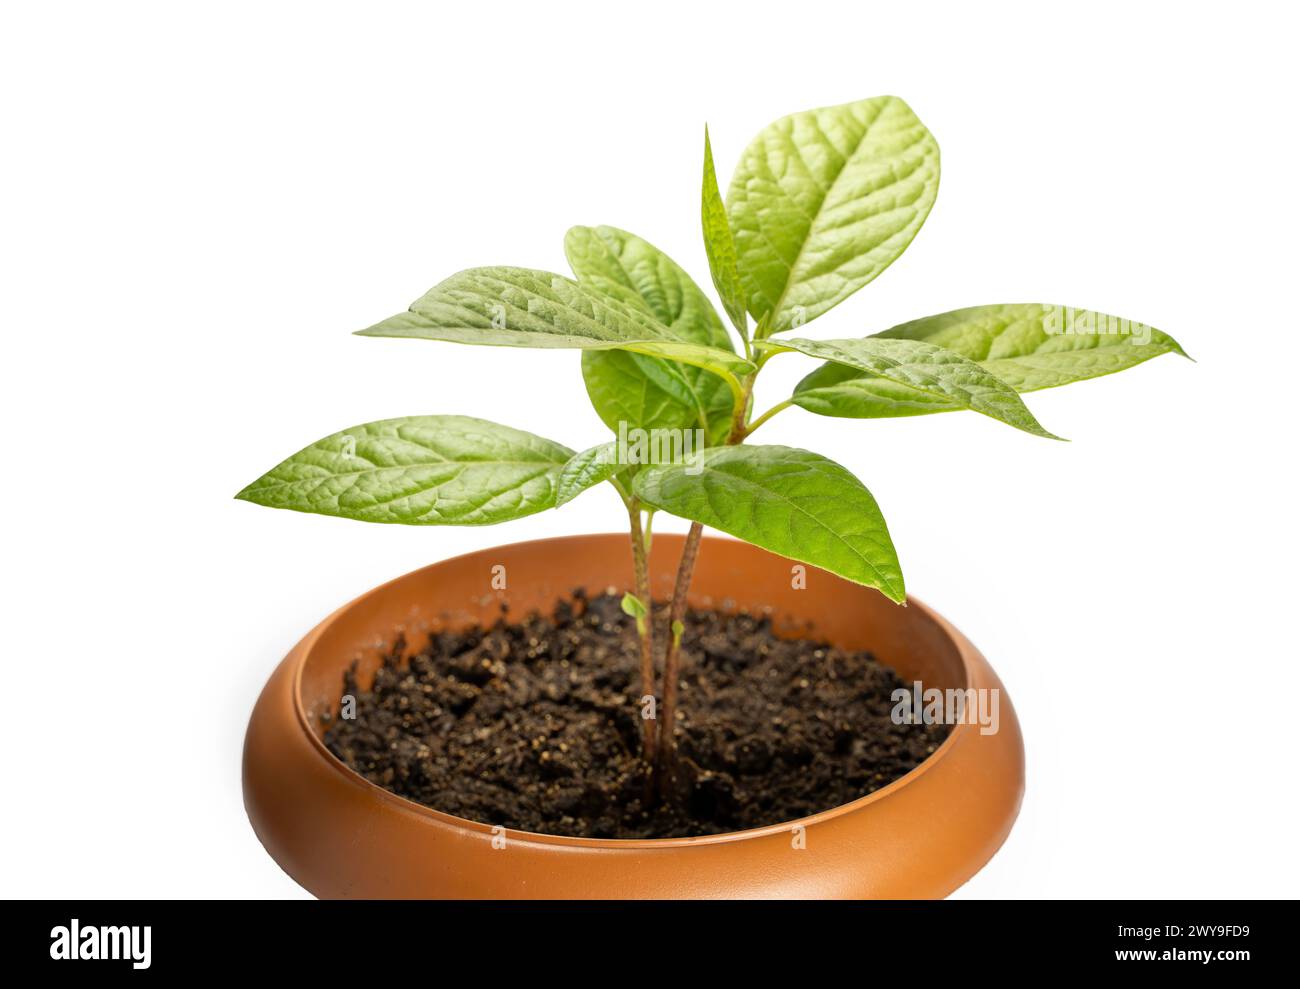 Close Up Shot Of An Avocado Sapling With New Leaves In A Small Plastic Pot, Isolated On White Surface Stock Photo